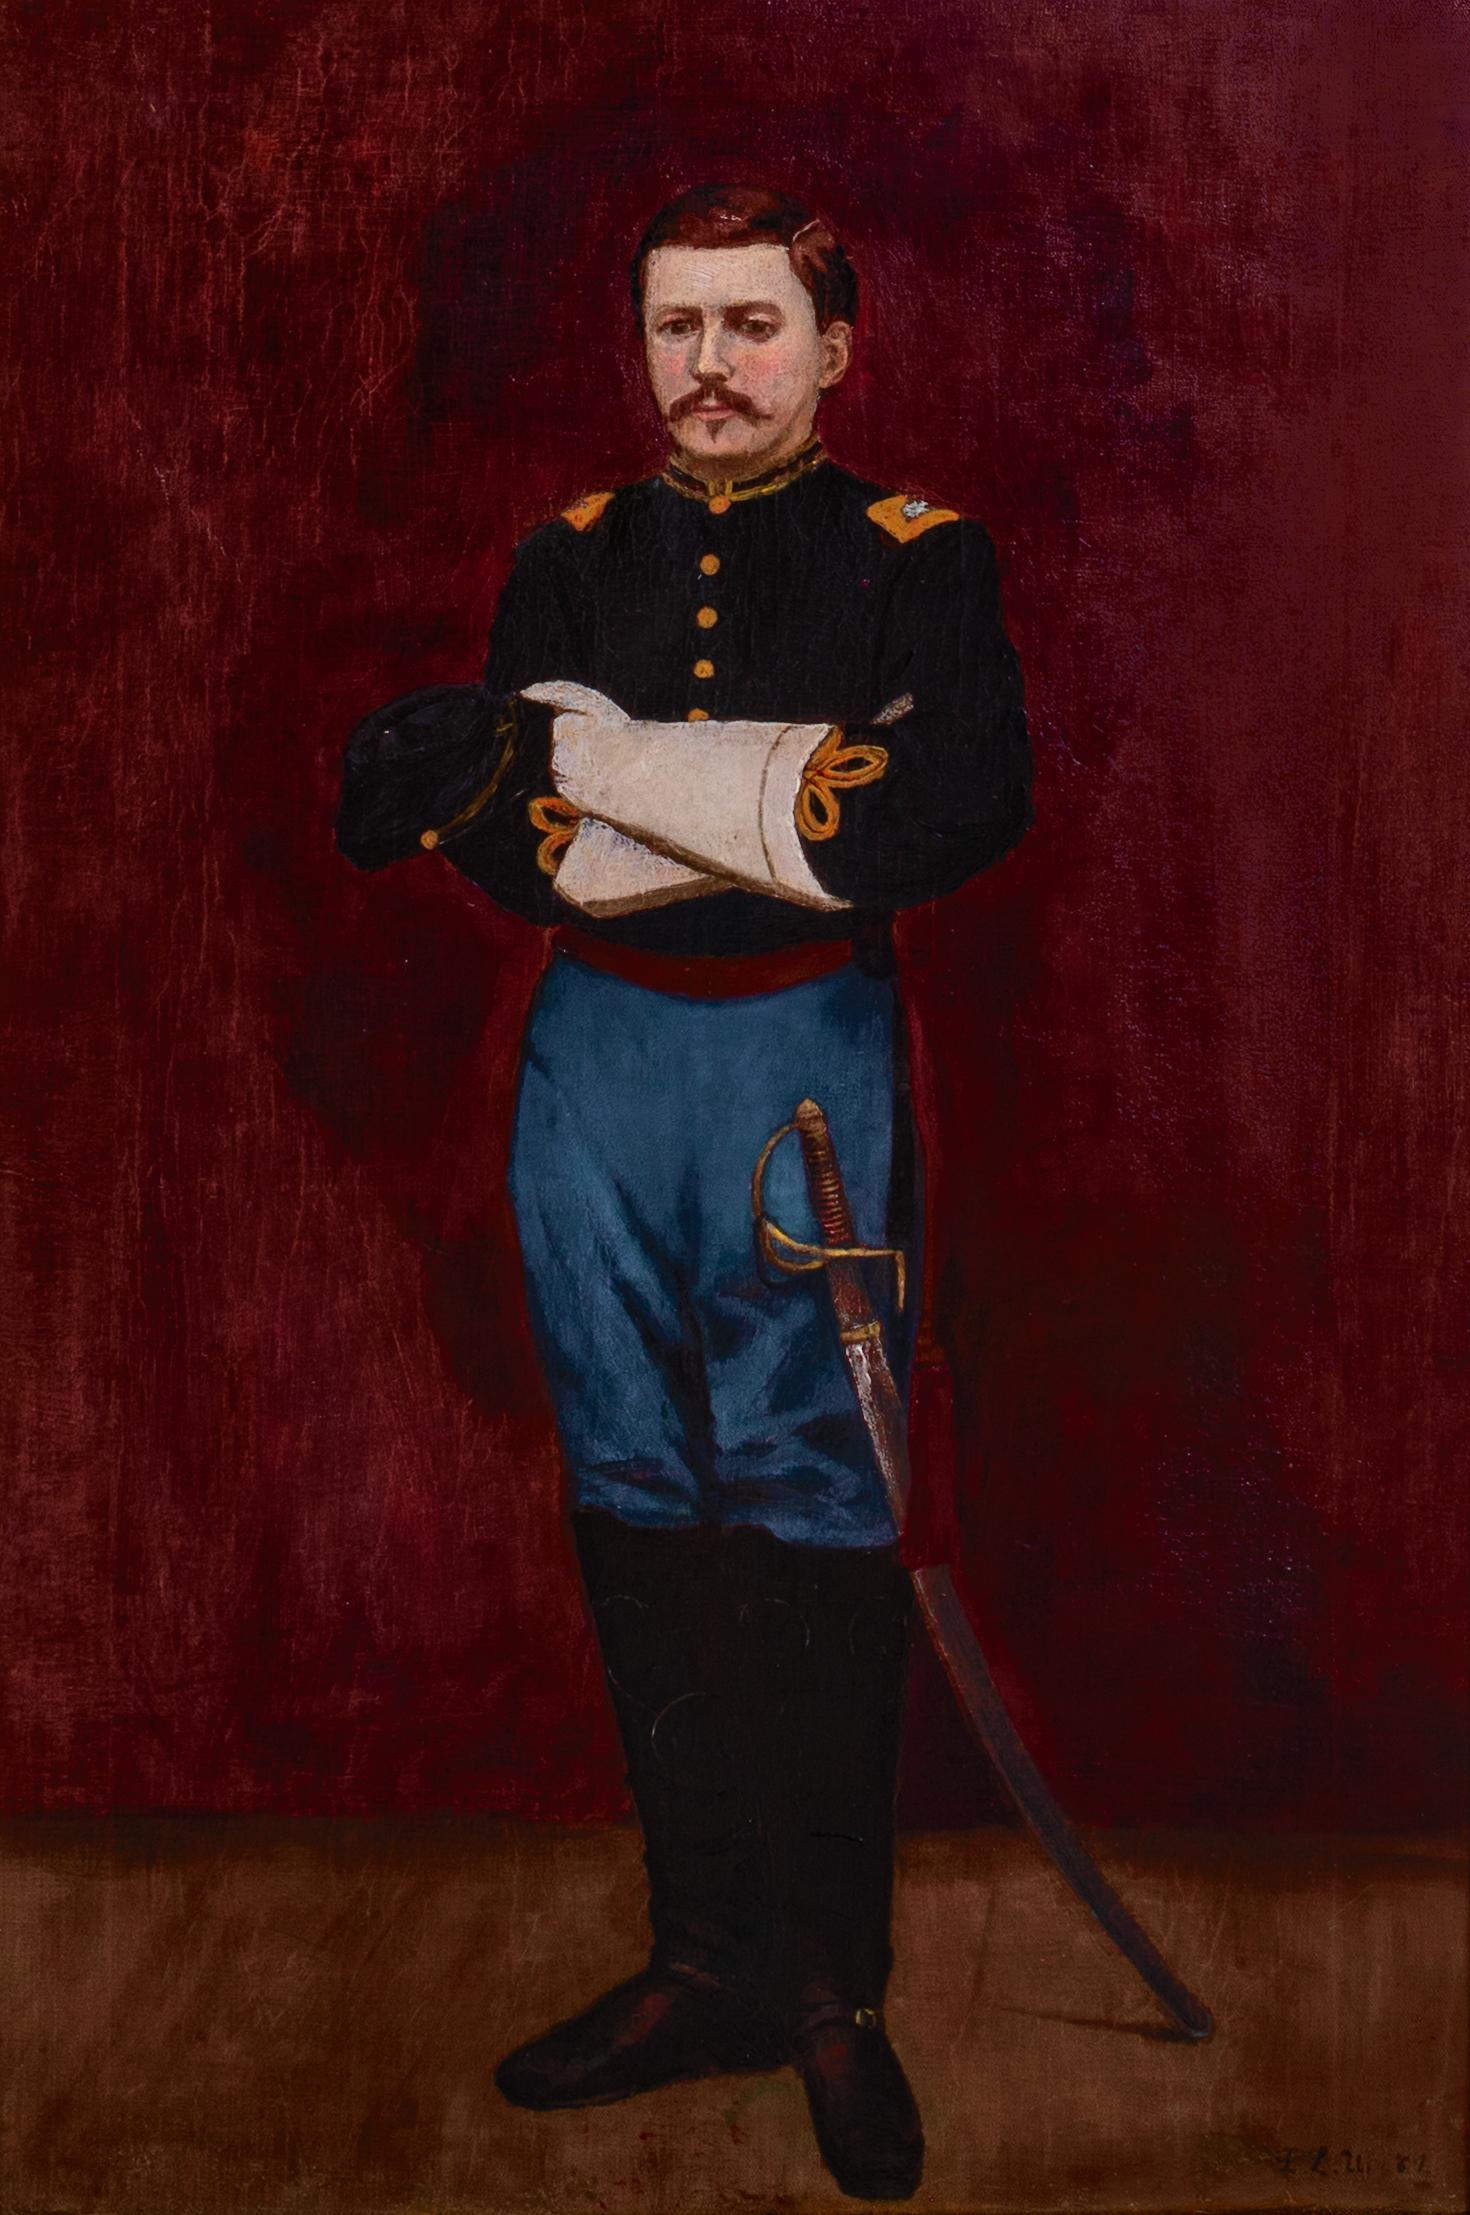 Portrait General George Brinton McClellan (1826-1885), 19th Century

Commanding General Of US Army to Abraham Lincoln, Governor of New Jersey

American School

Large 19th century military portrait of General B McClellan, oil on canvas. Excellent